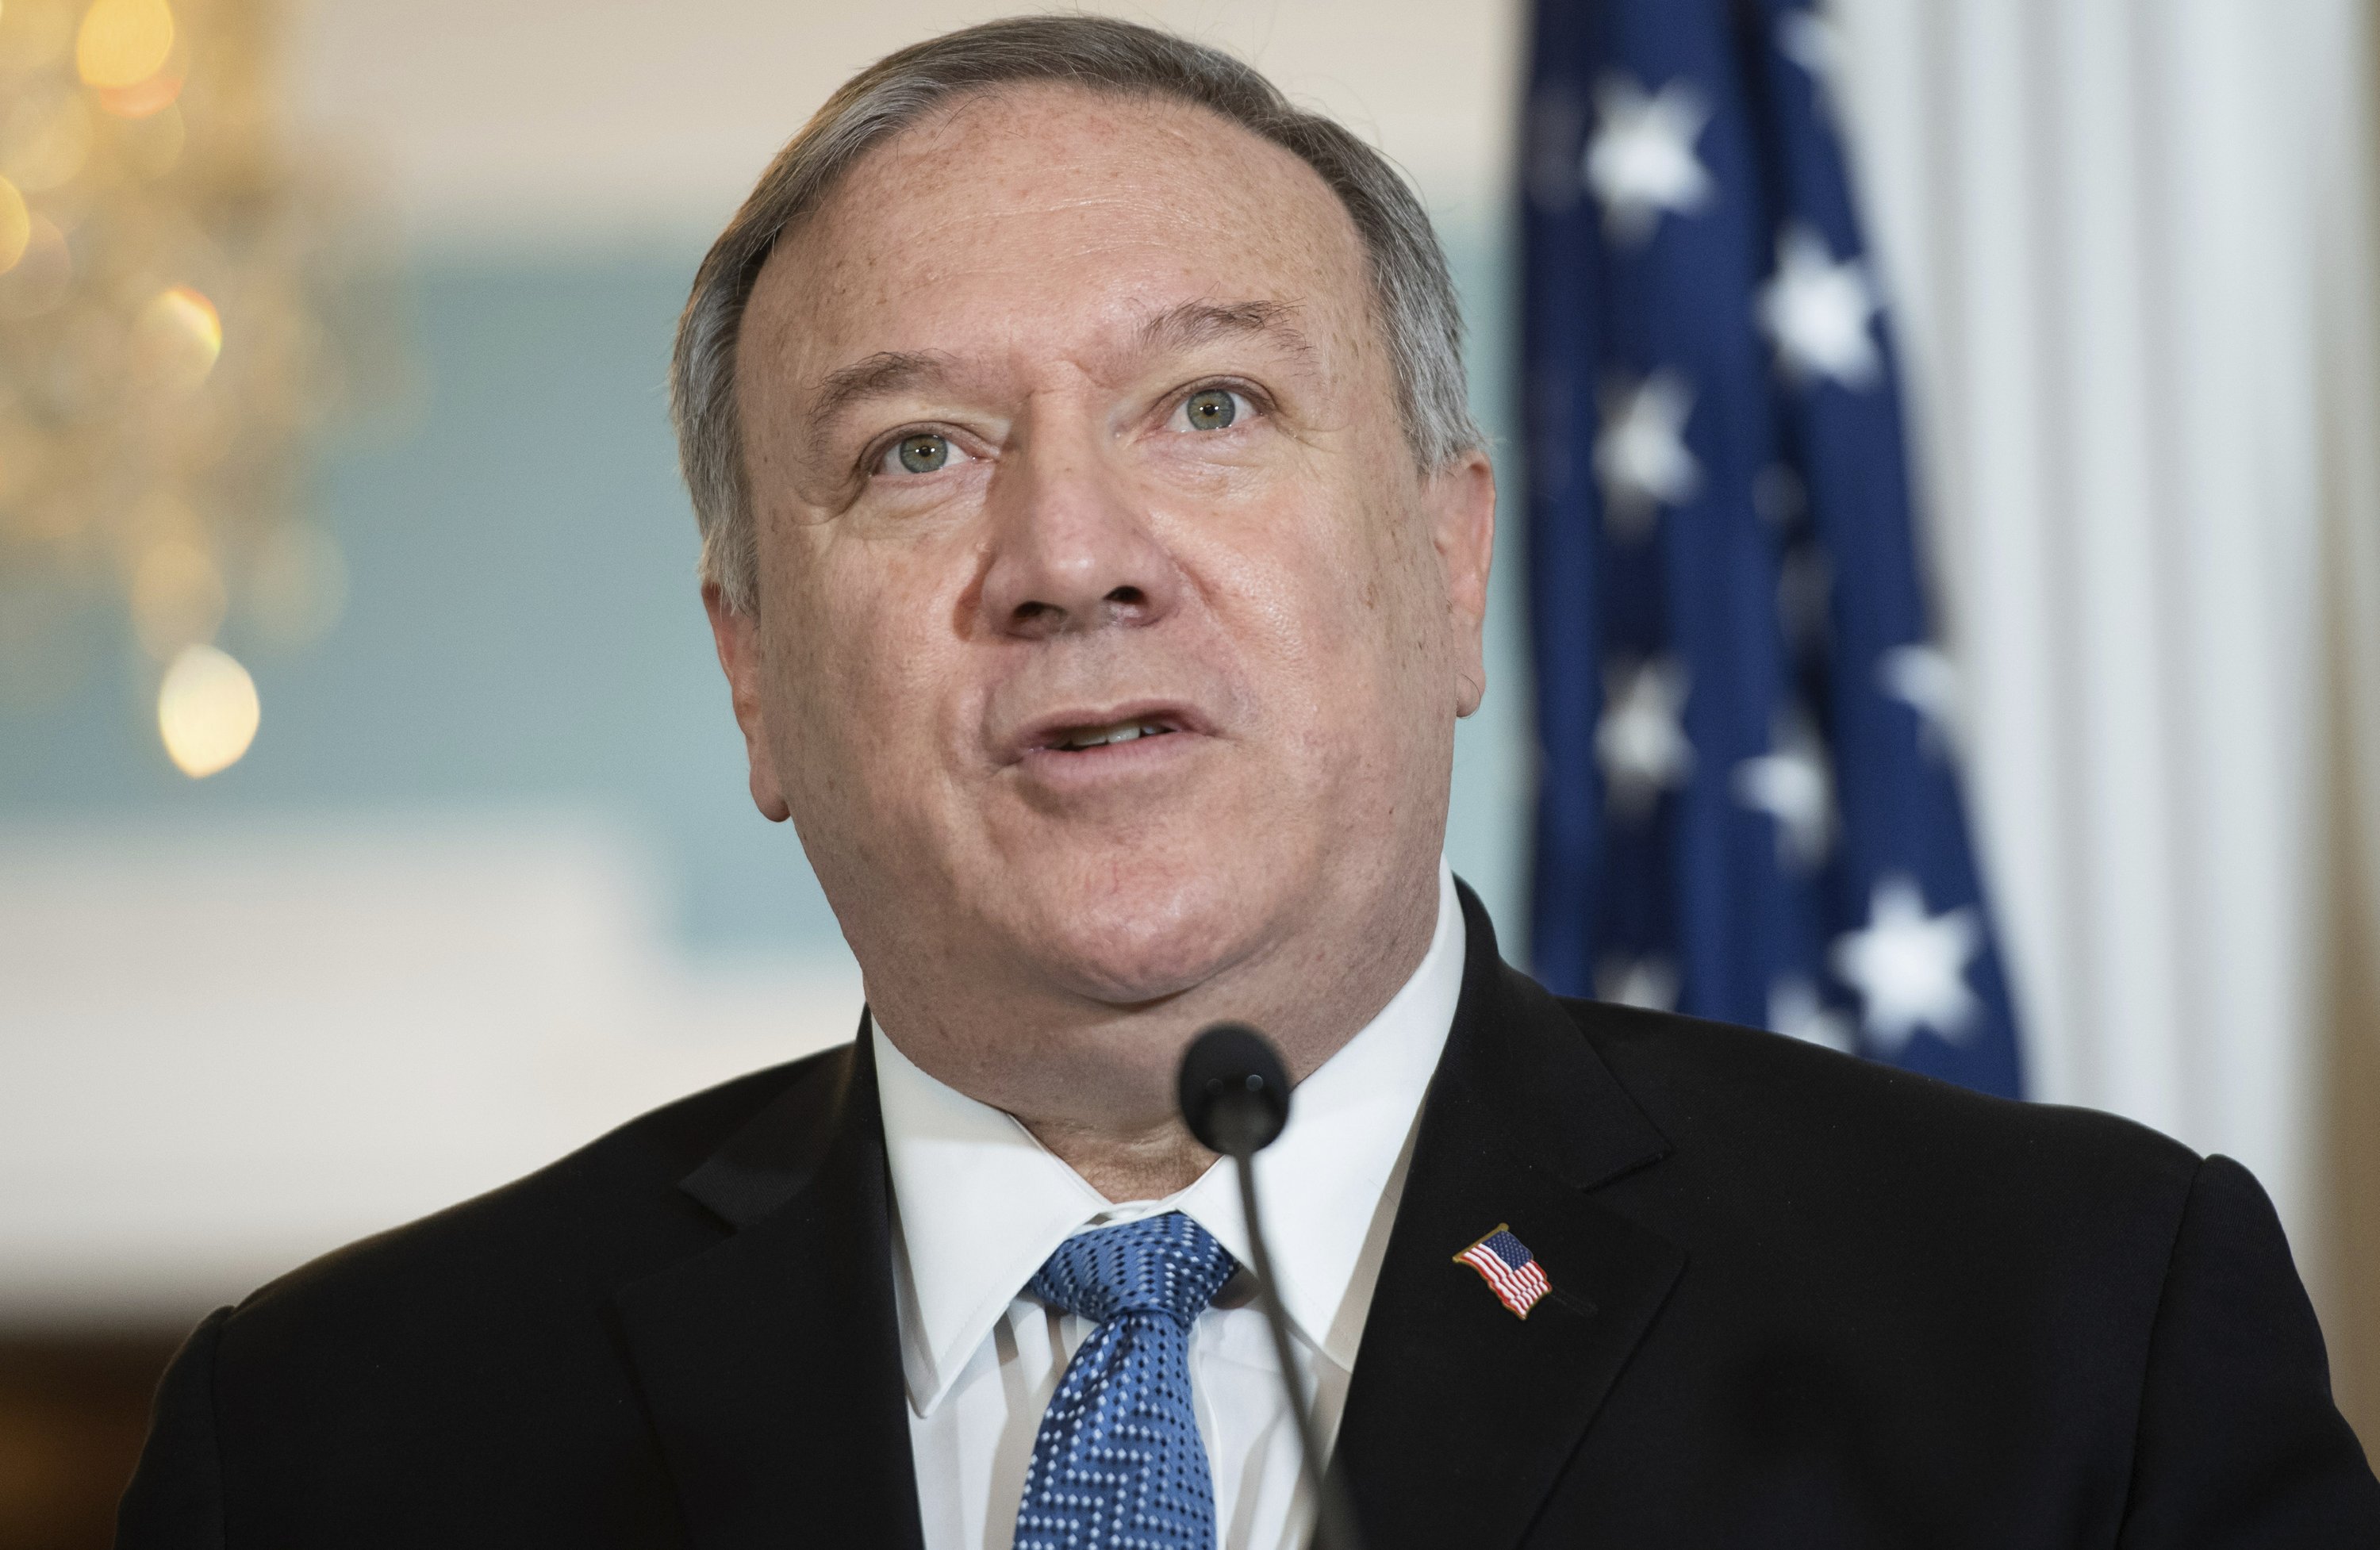 Pompeo overrides restrictions on diplomatic contacts with Taiwan